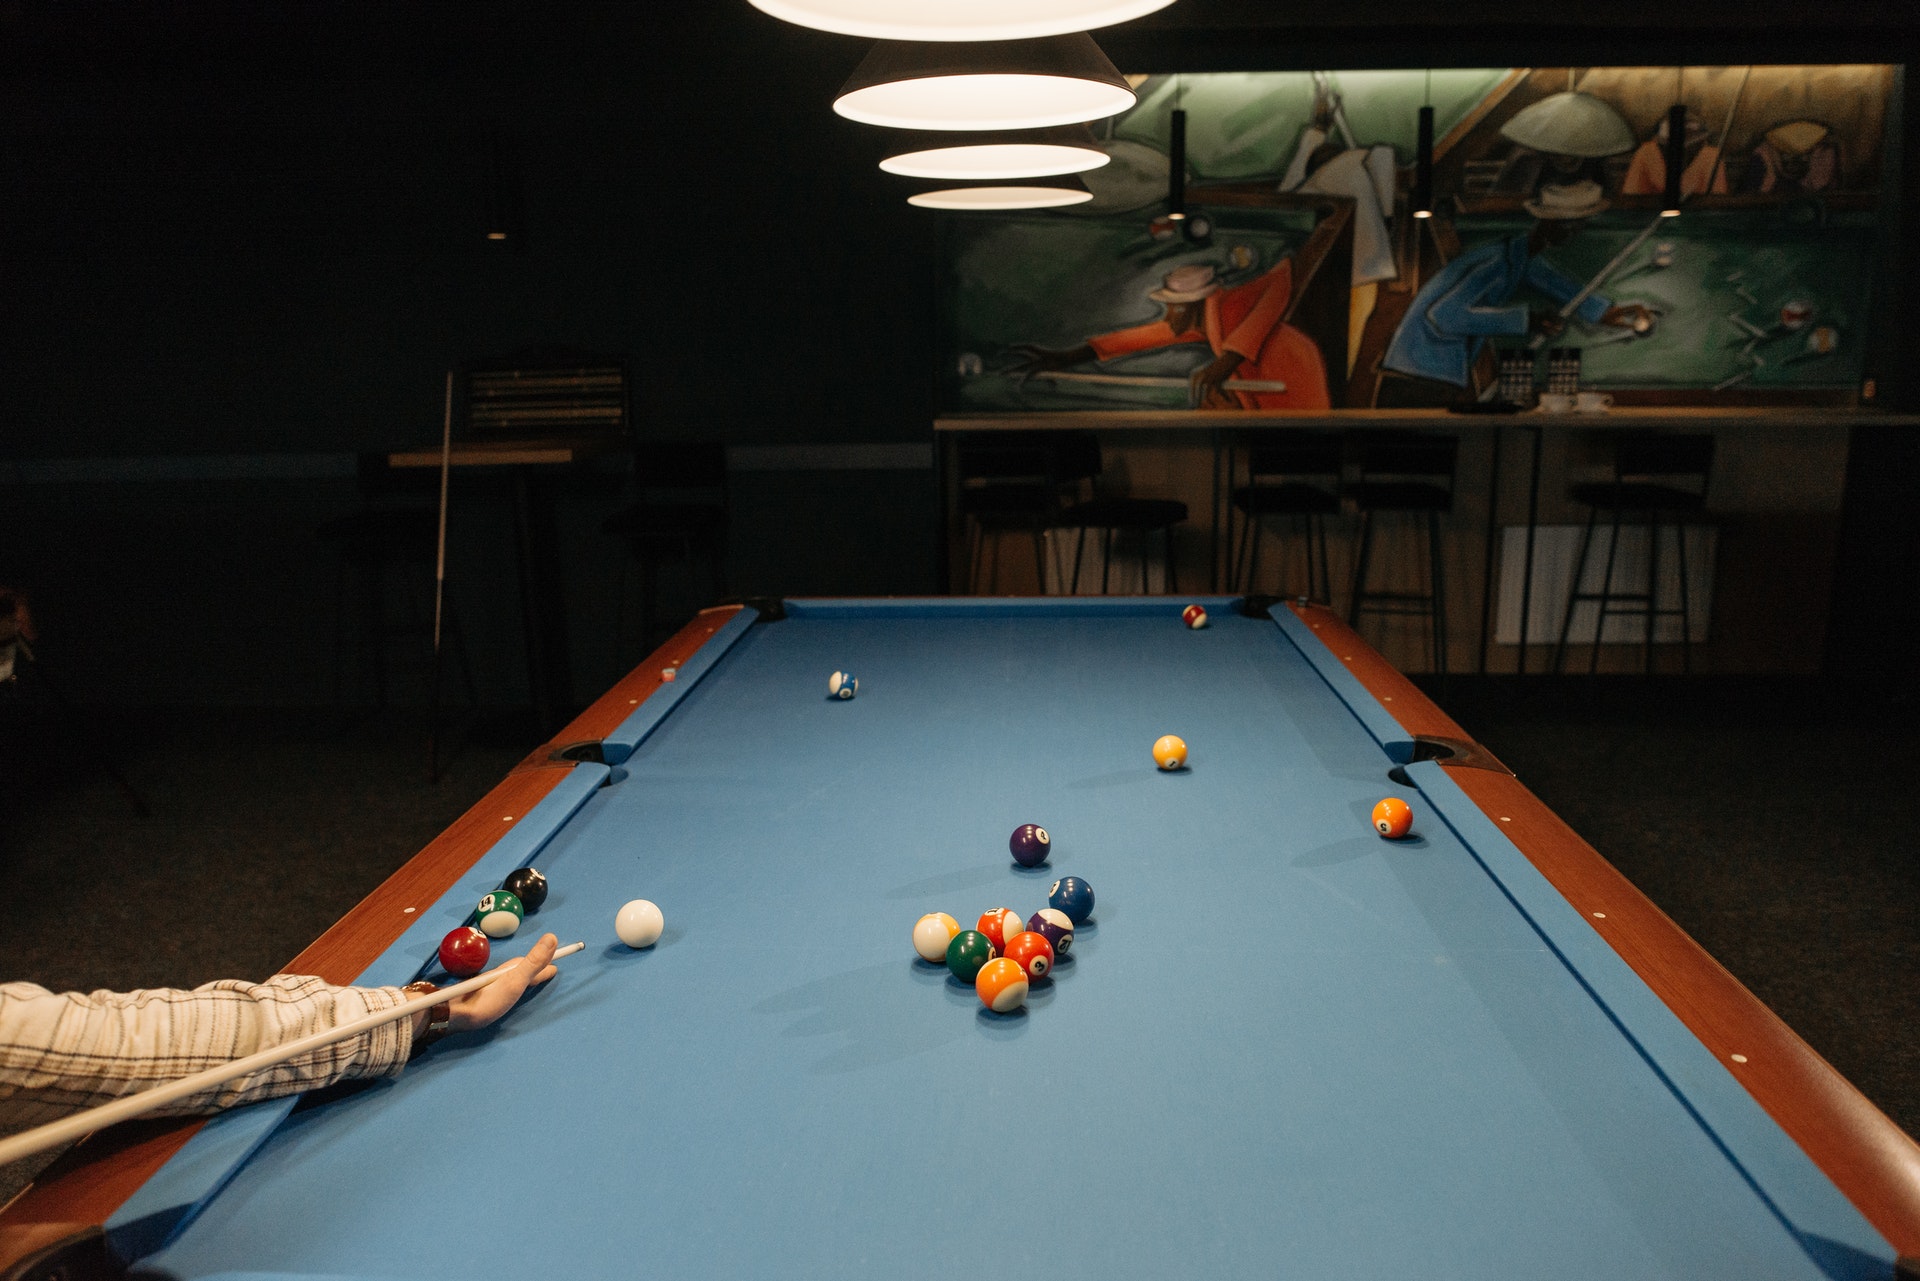 How To Use A Pool Cue?